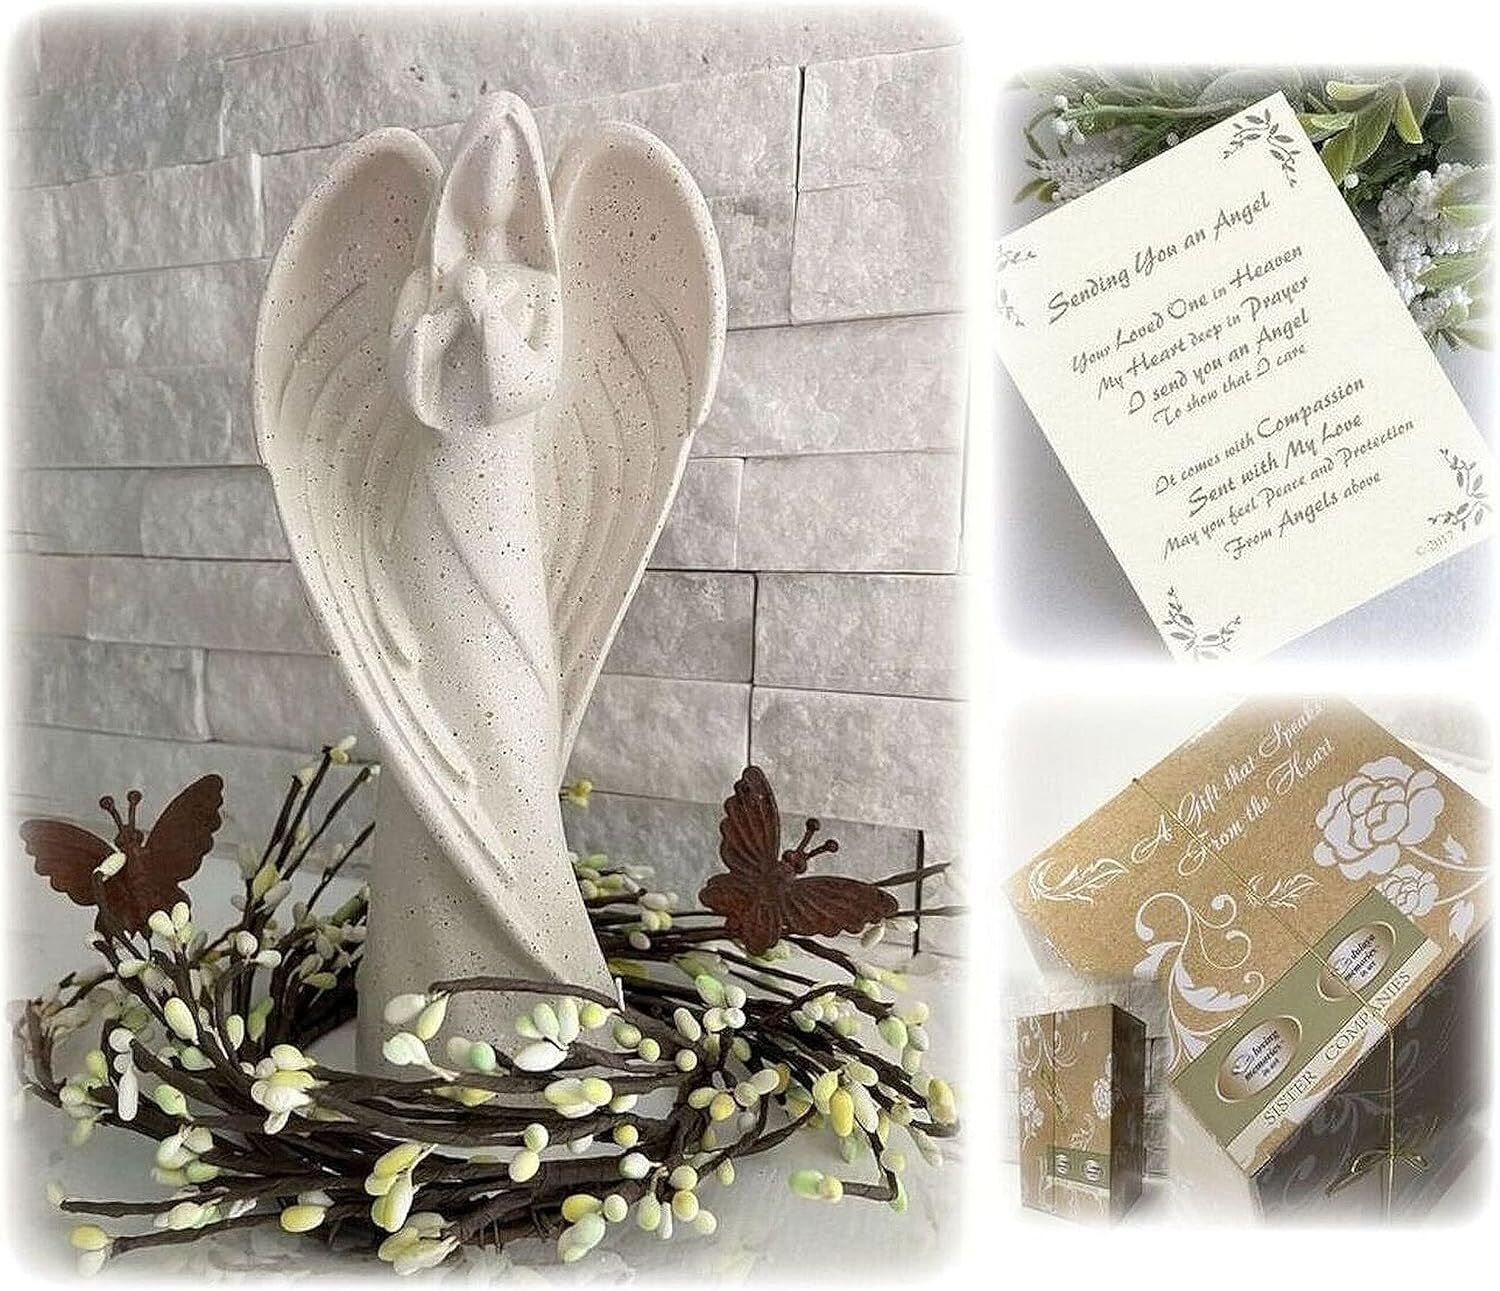 Angel Statue Sympathy Gift for Memorial Express Condolences for Loss of Loved